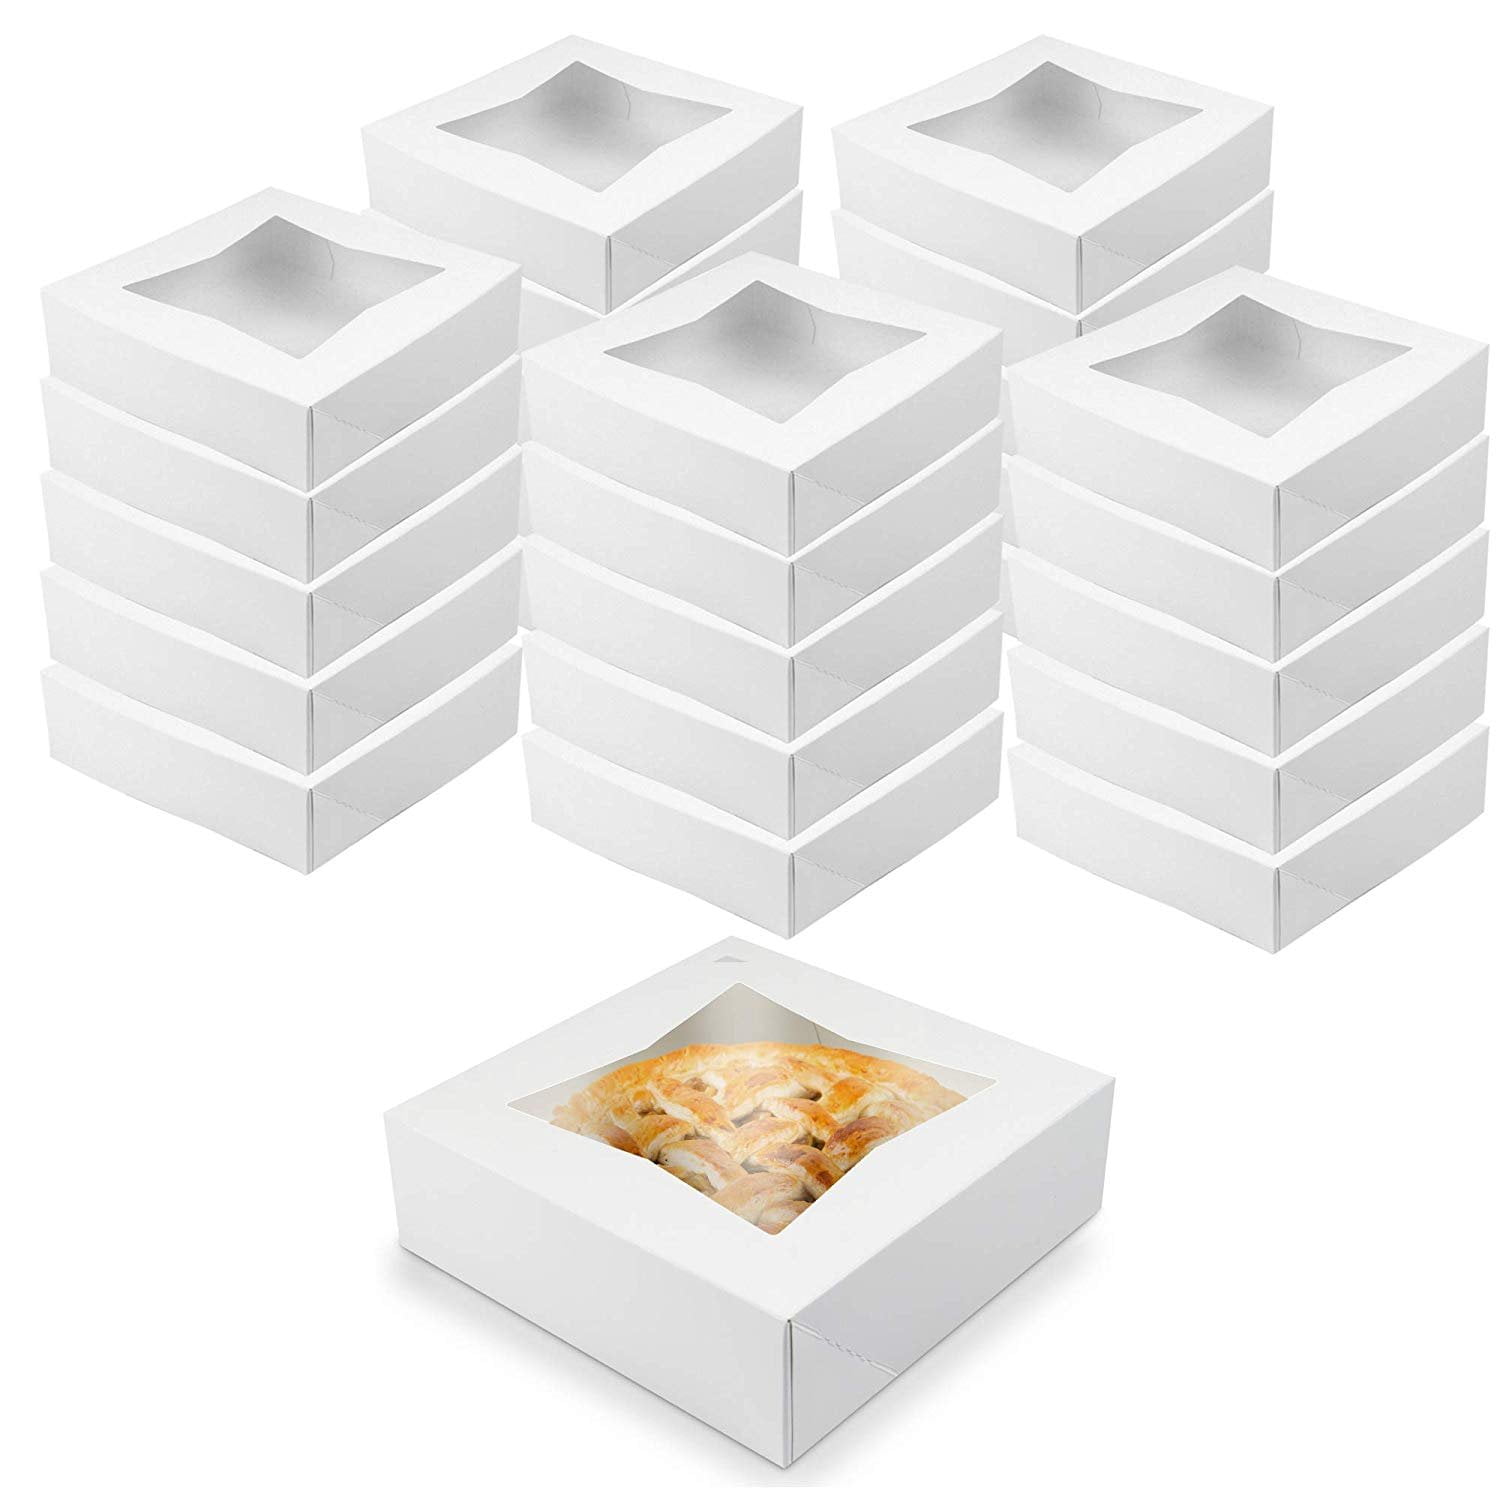 O'Creme White Bakery Boxes with Window 8x8x2.5 in, 25 Pack, Display Pies, Pastries, Cupcakes and Cookies | Paperboard White Kraft Auto-Popup Window Cake Boxes, Pie Pastry Container Carrier - Walmart.com - Walmart.com